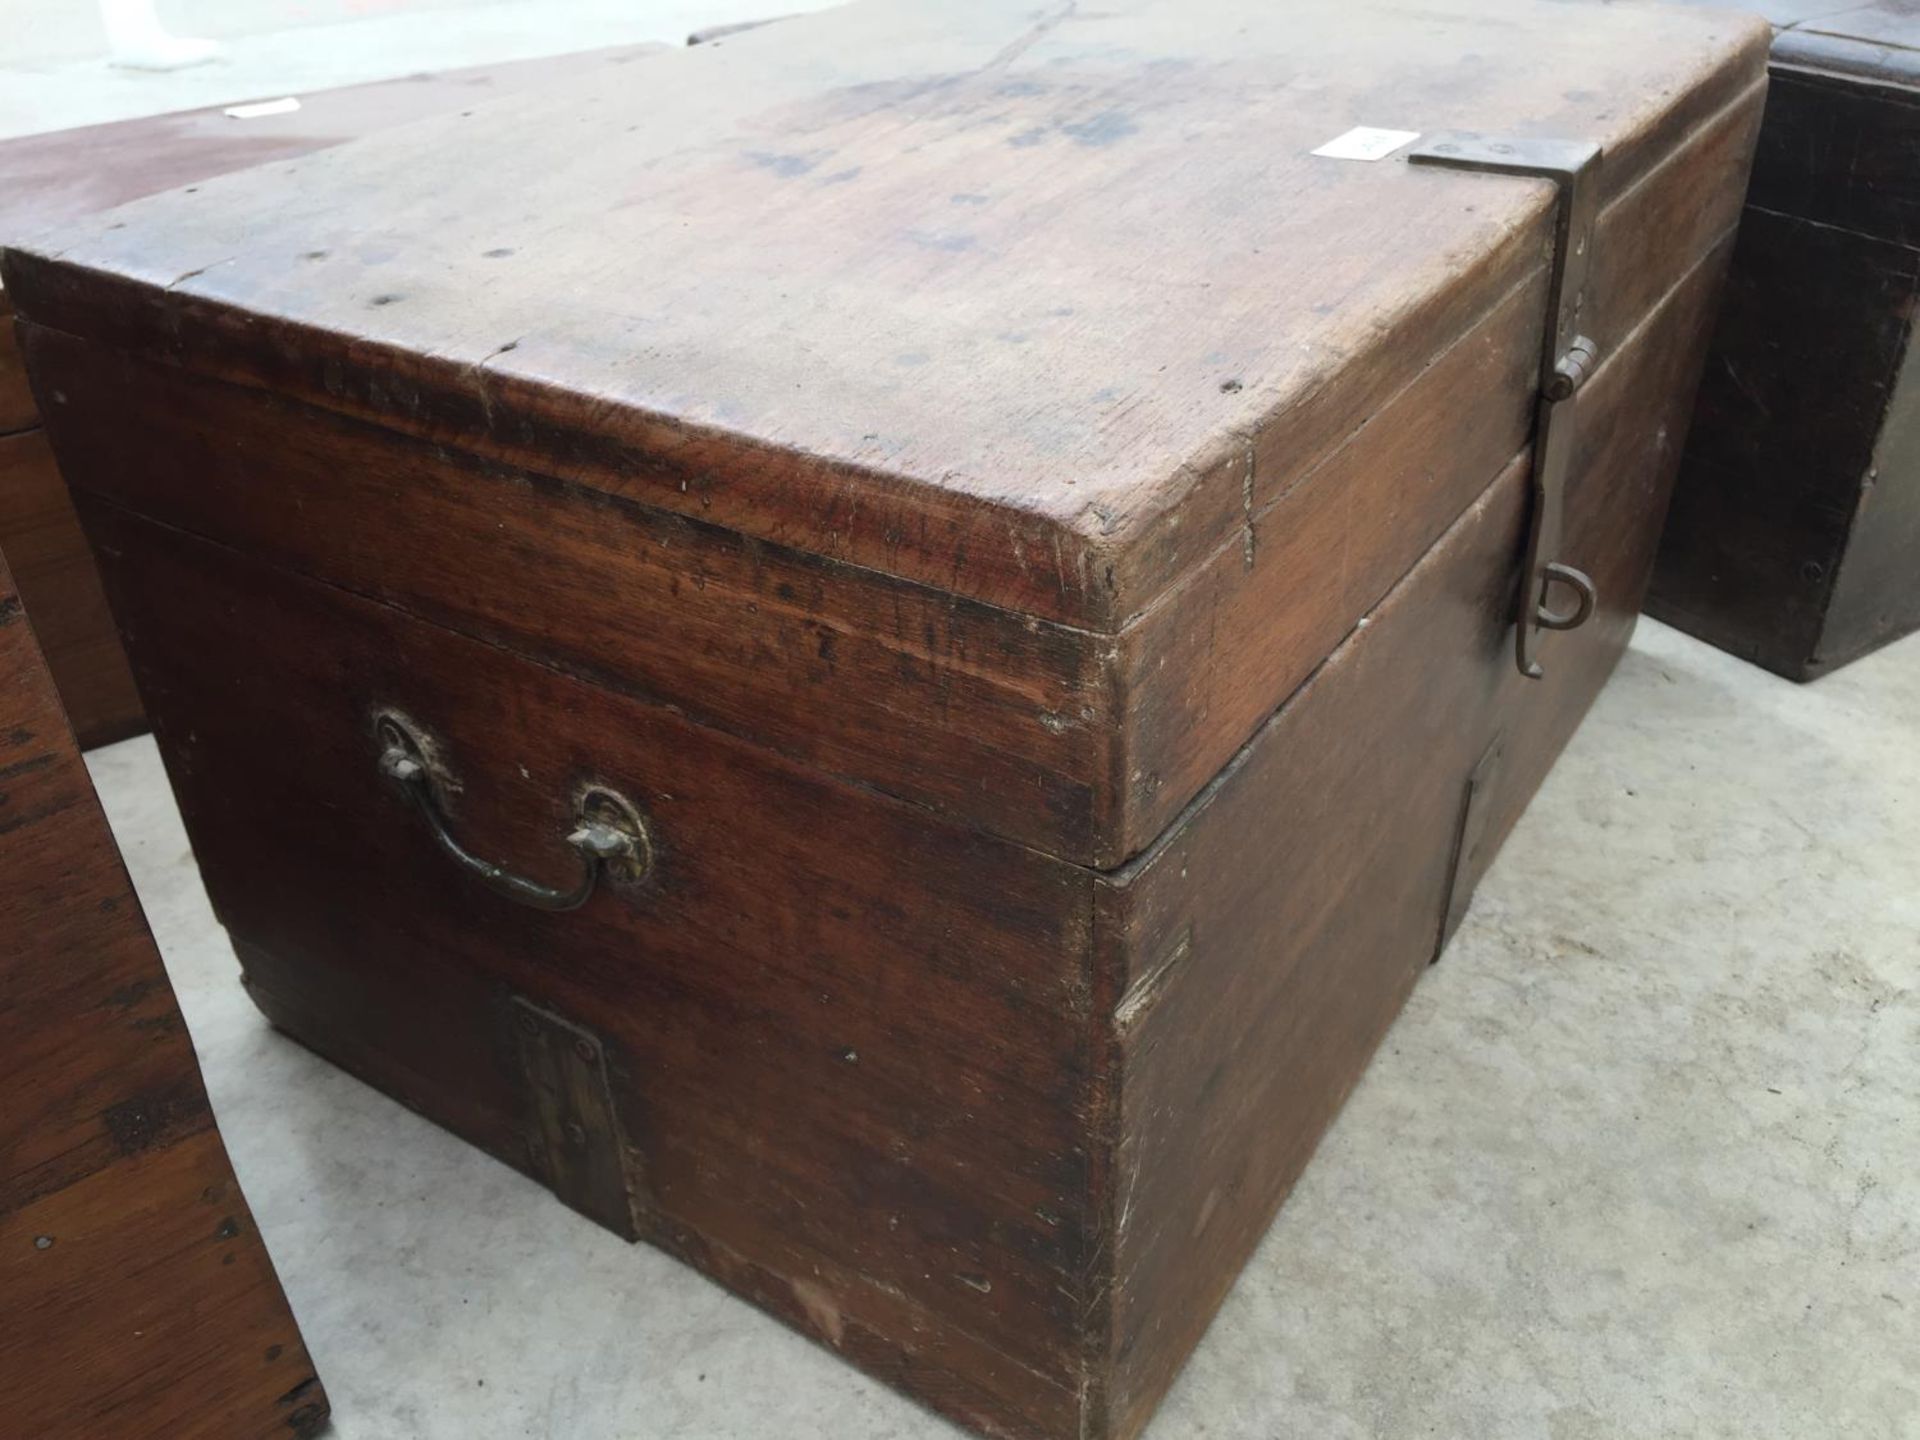 AN INDIAN HARDWOOD WRITING BOX WITH BRASS FITTINGS, 22" WIDE - Image 2 of 4